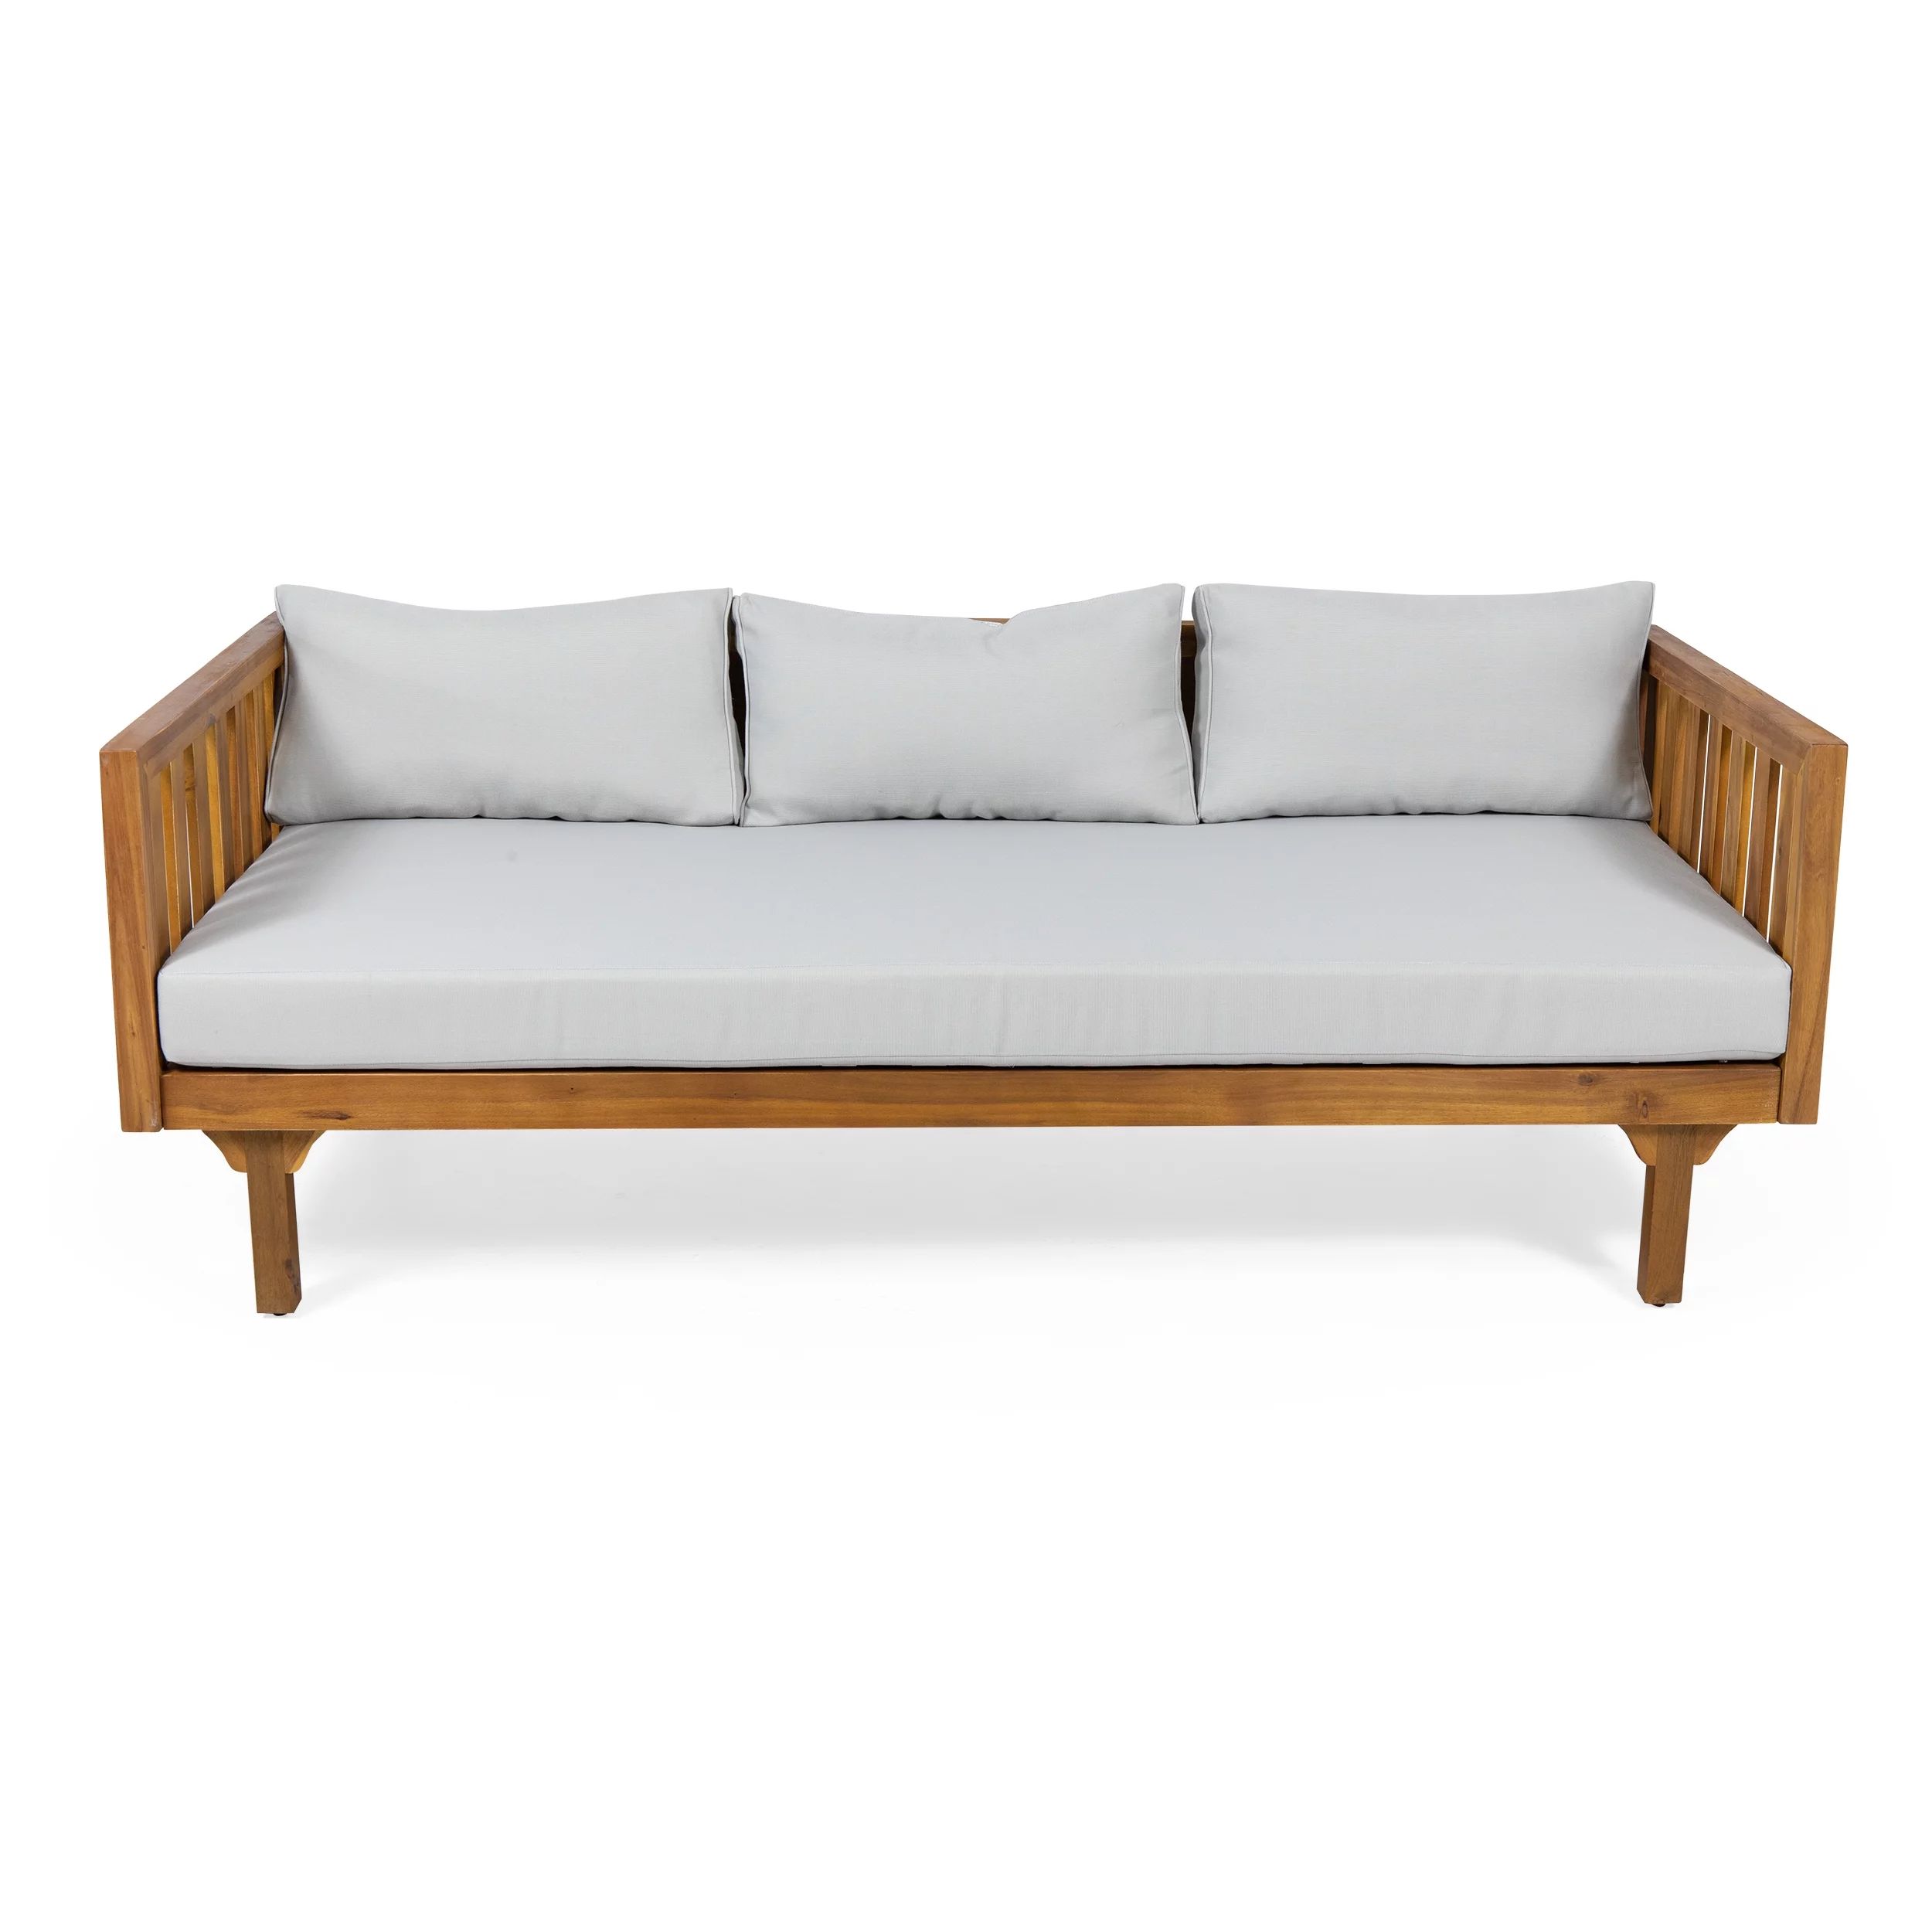 Noble House Lainey Outdoor 3-Seater Acacia Wood Daybed, Teak, Light Gray | Walmart (US)